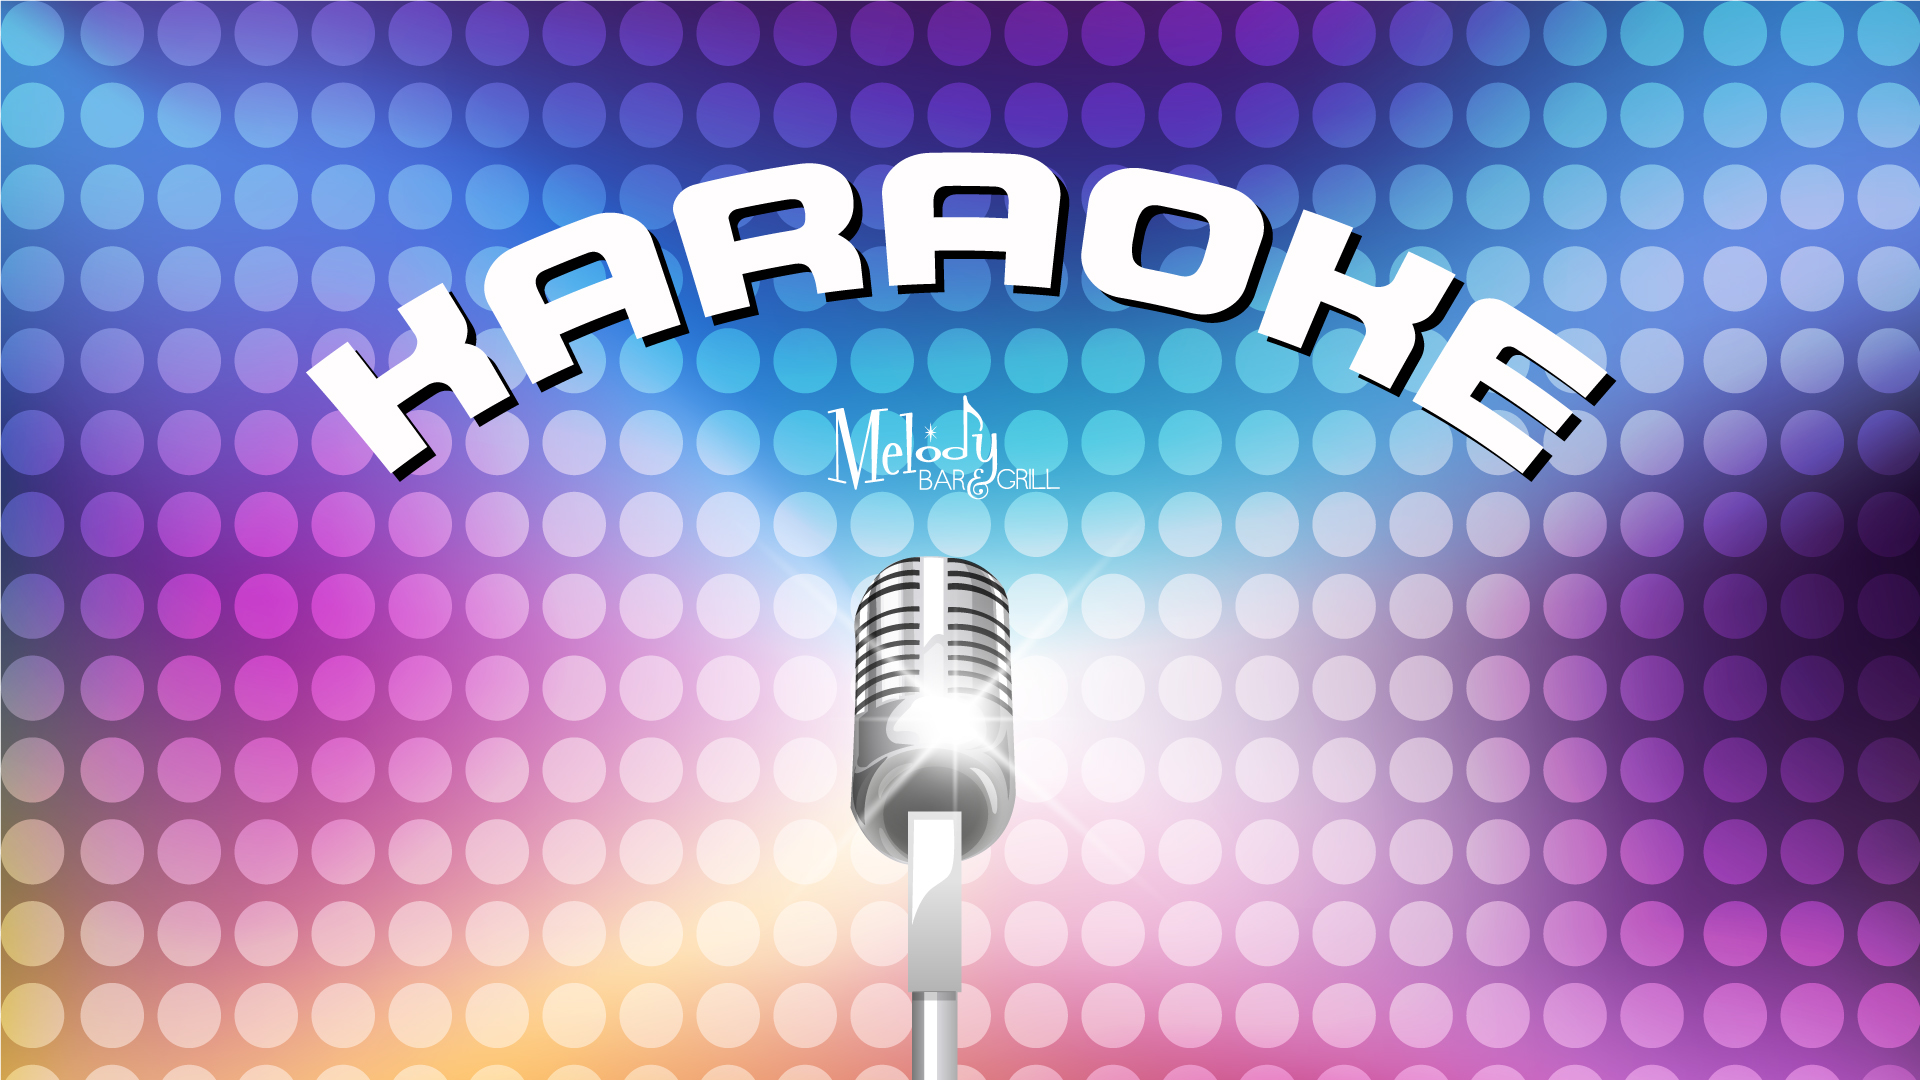 Karaoke | Every Wednesday | 8:30pm - Melody Bar and Grill